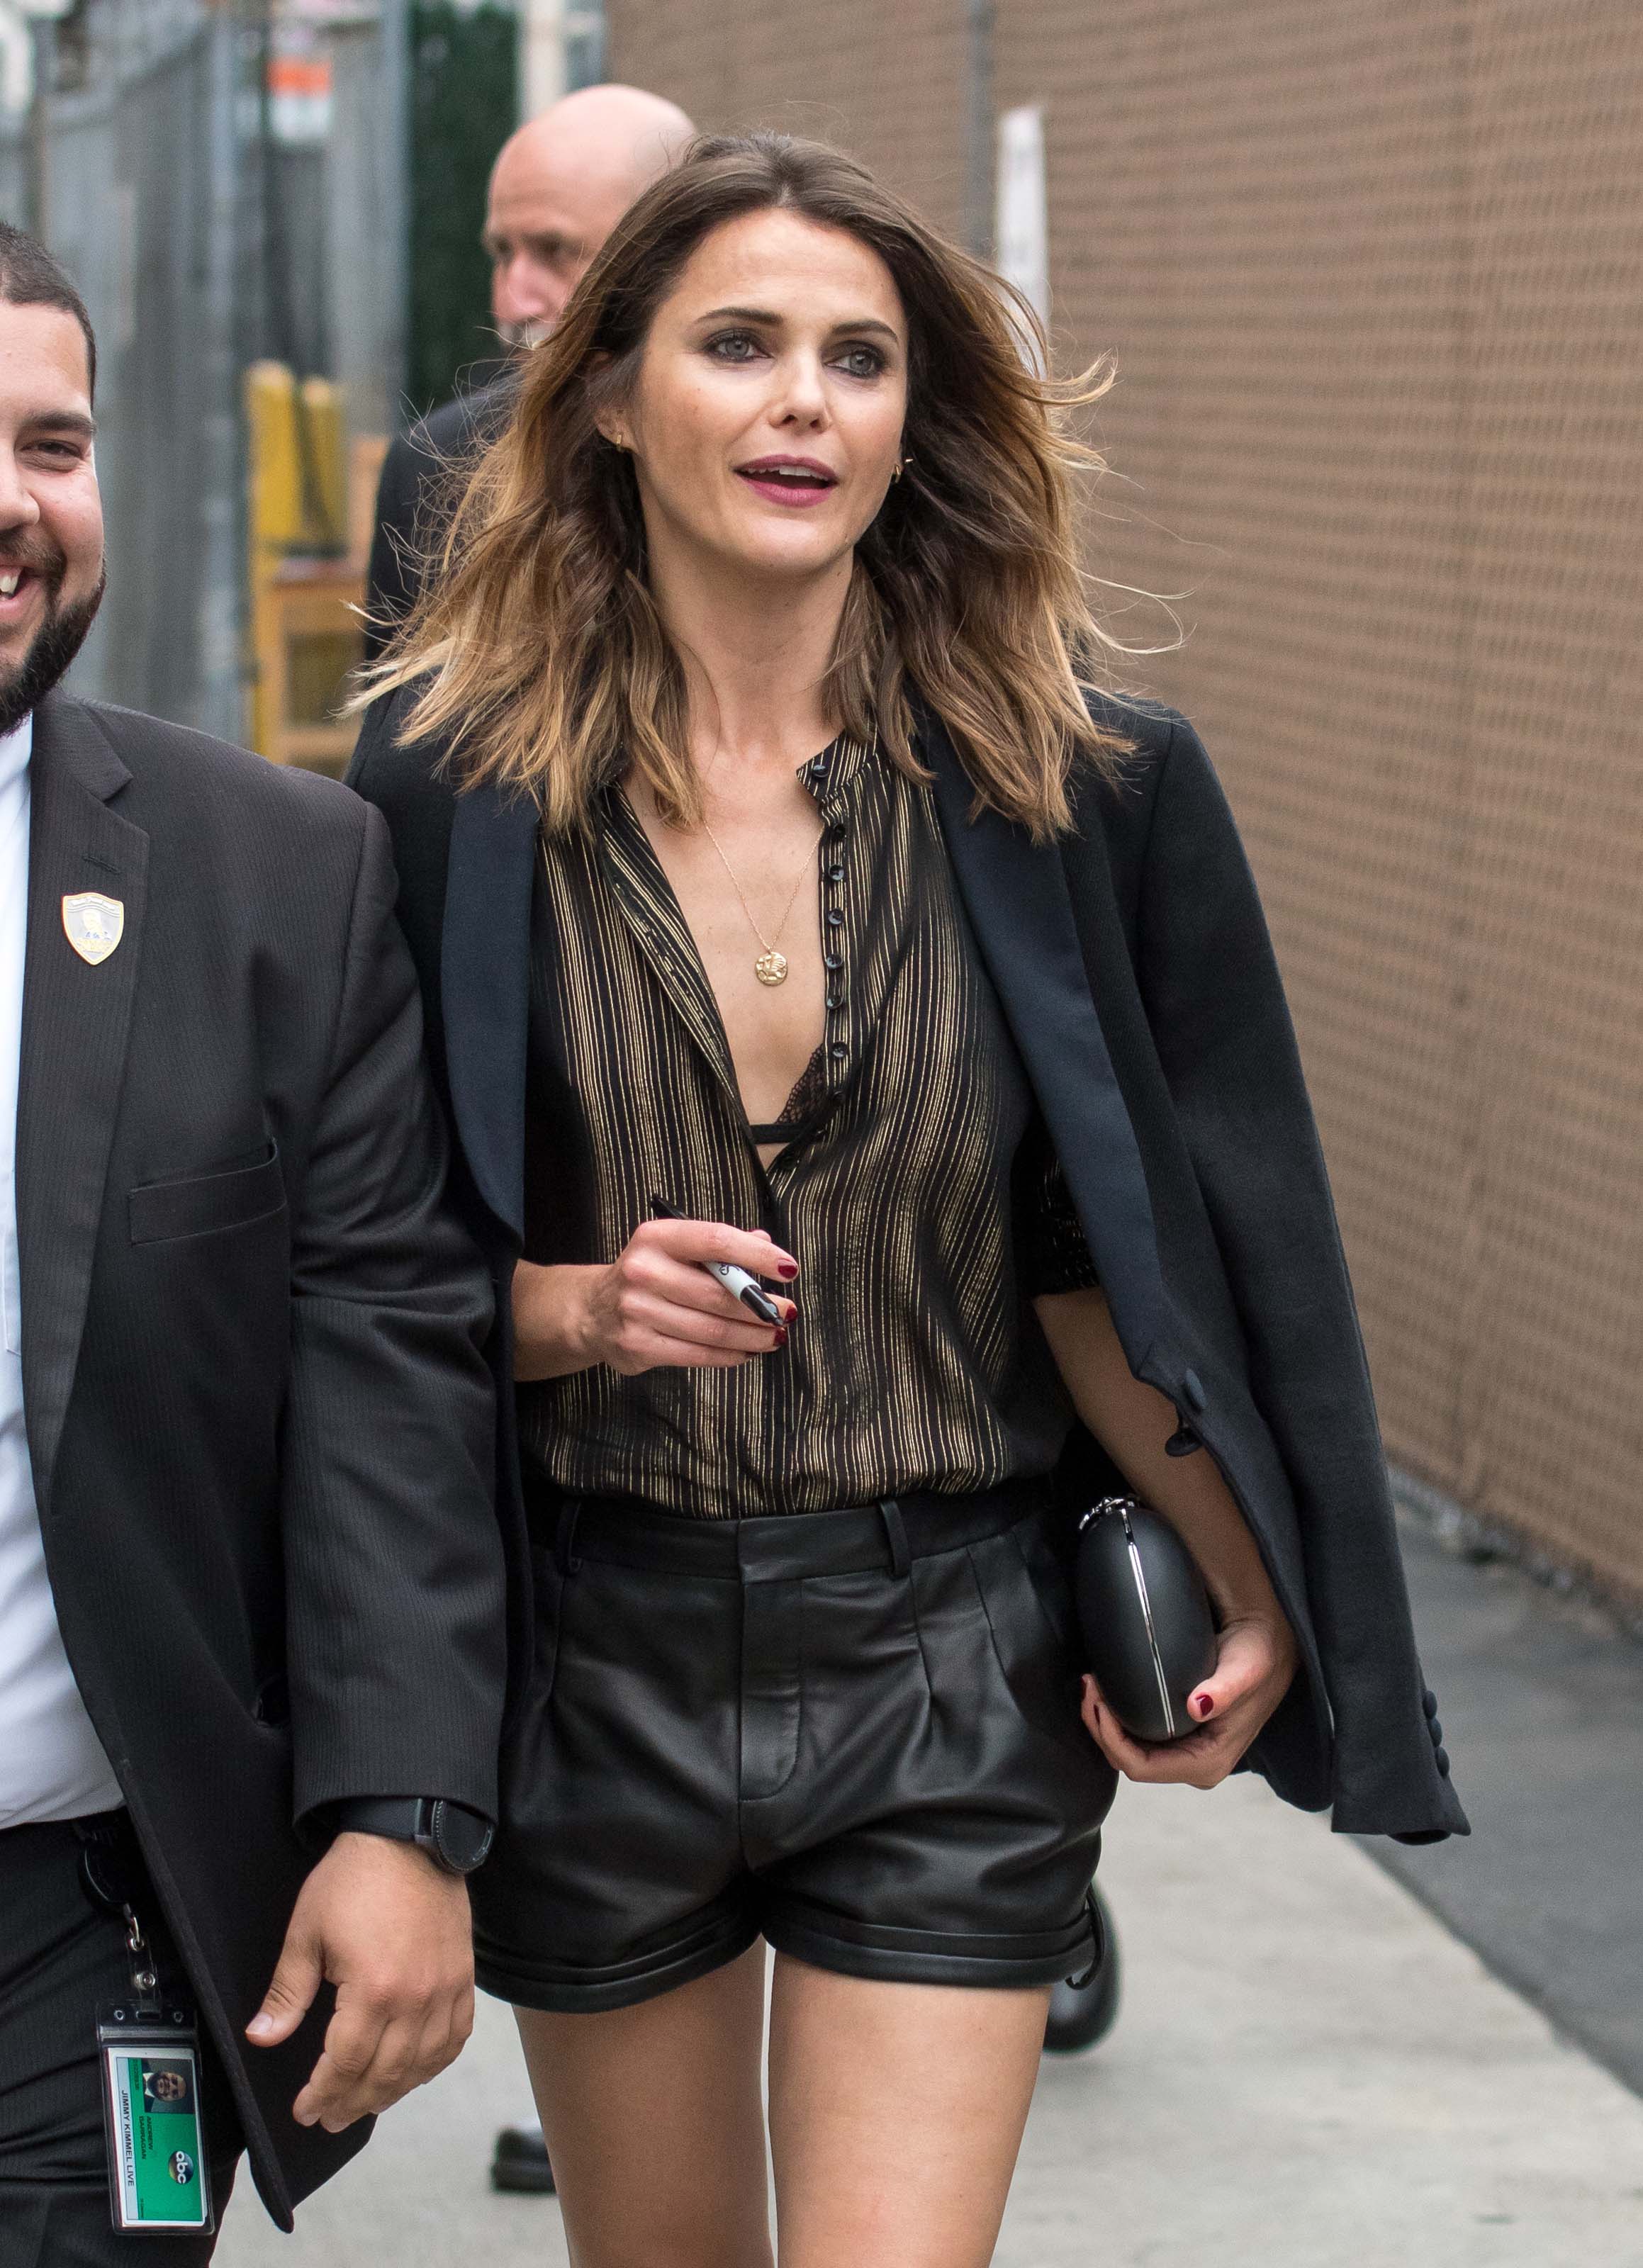 Keri Russell arriving at Jimmy Kimmel Live